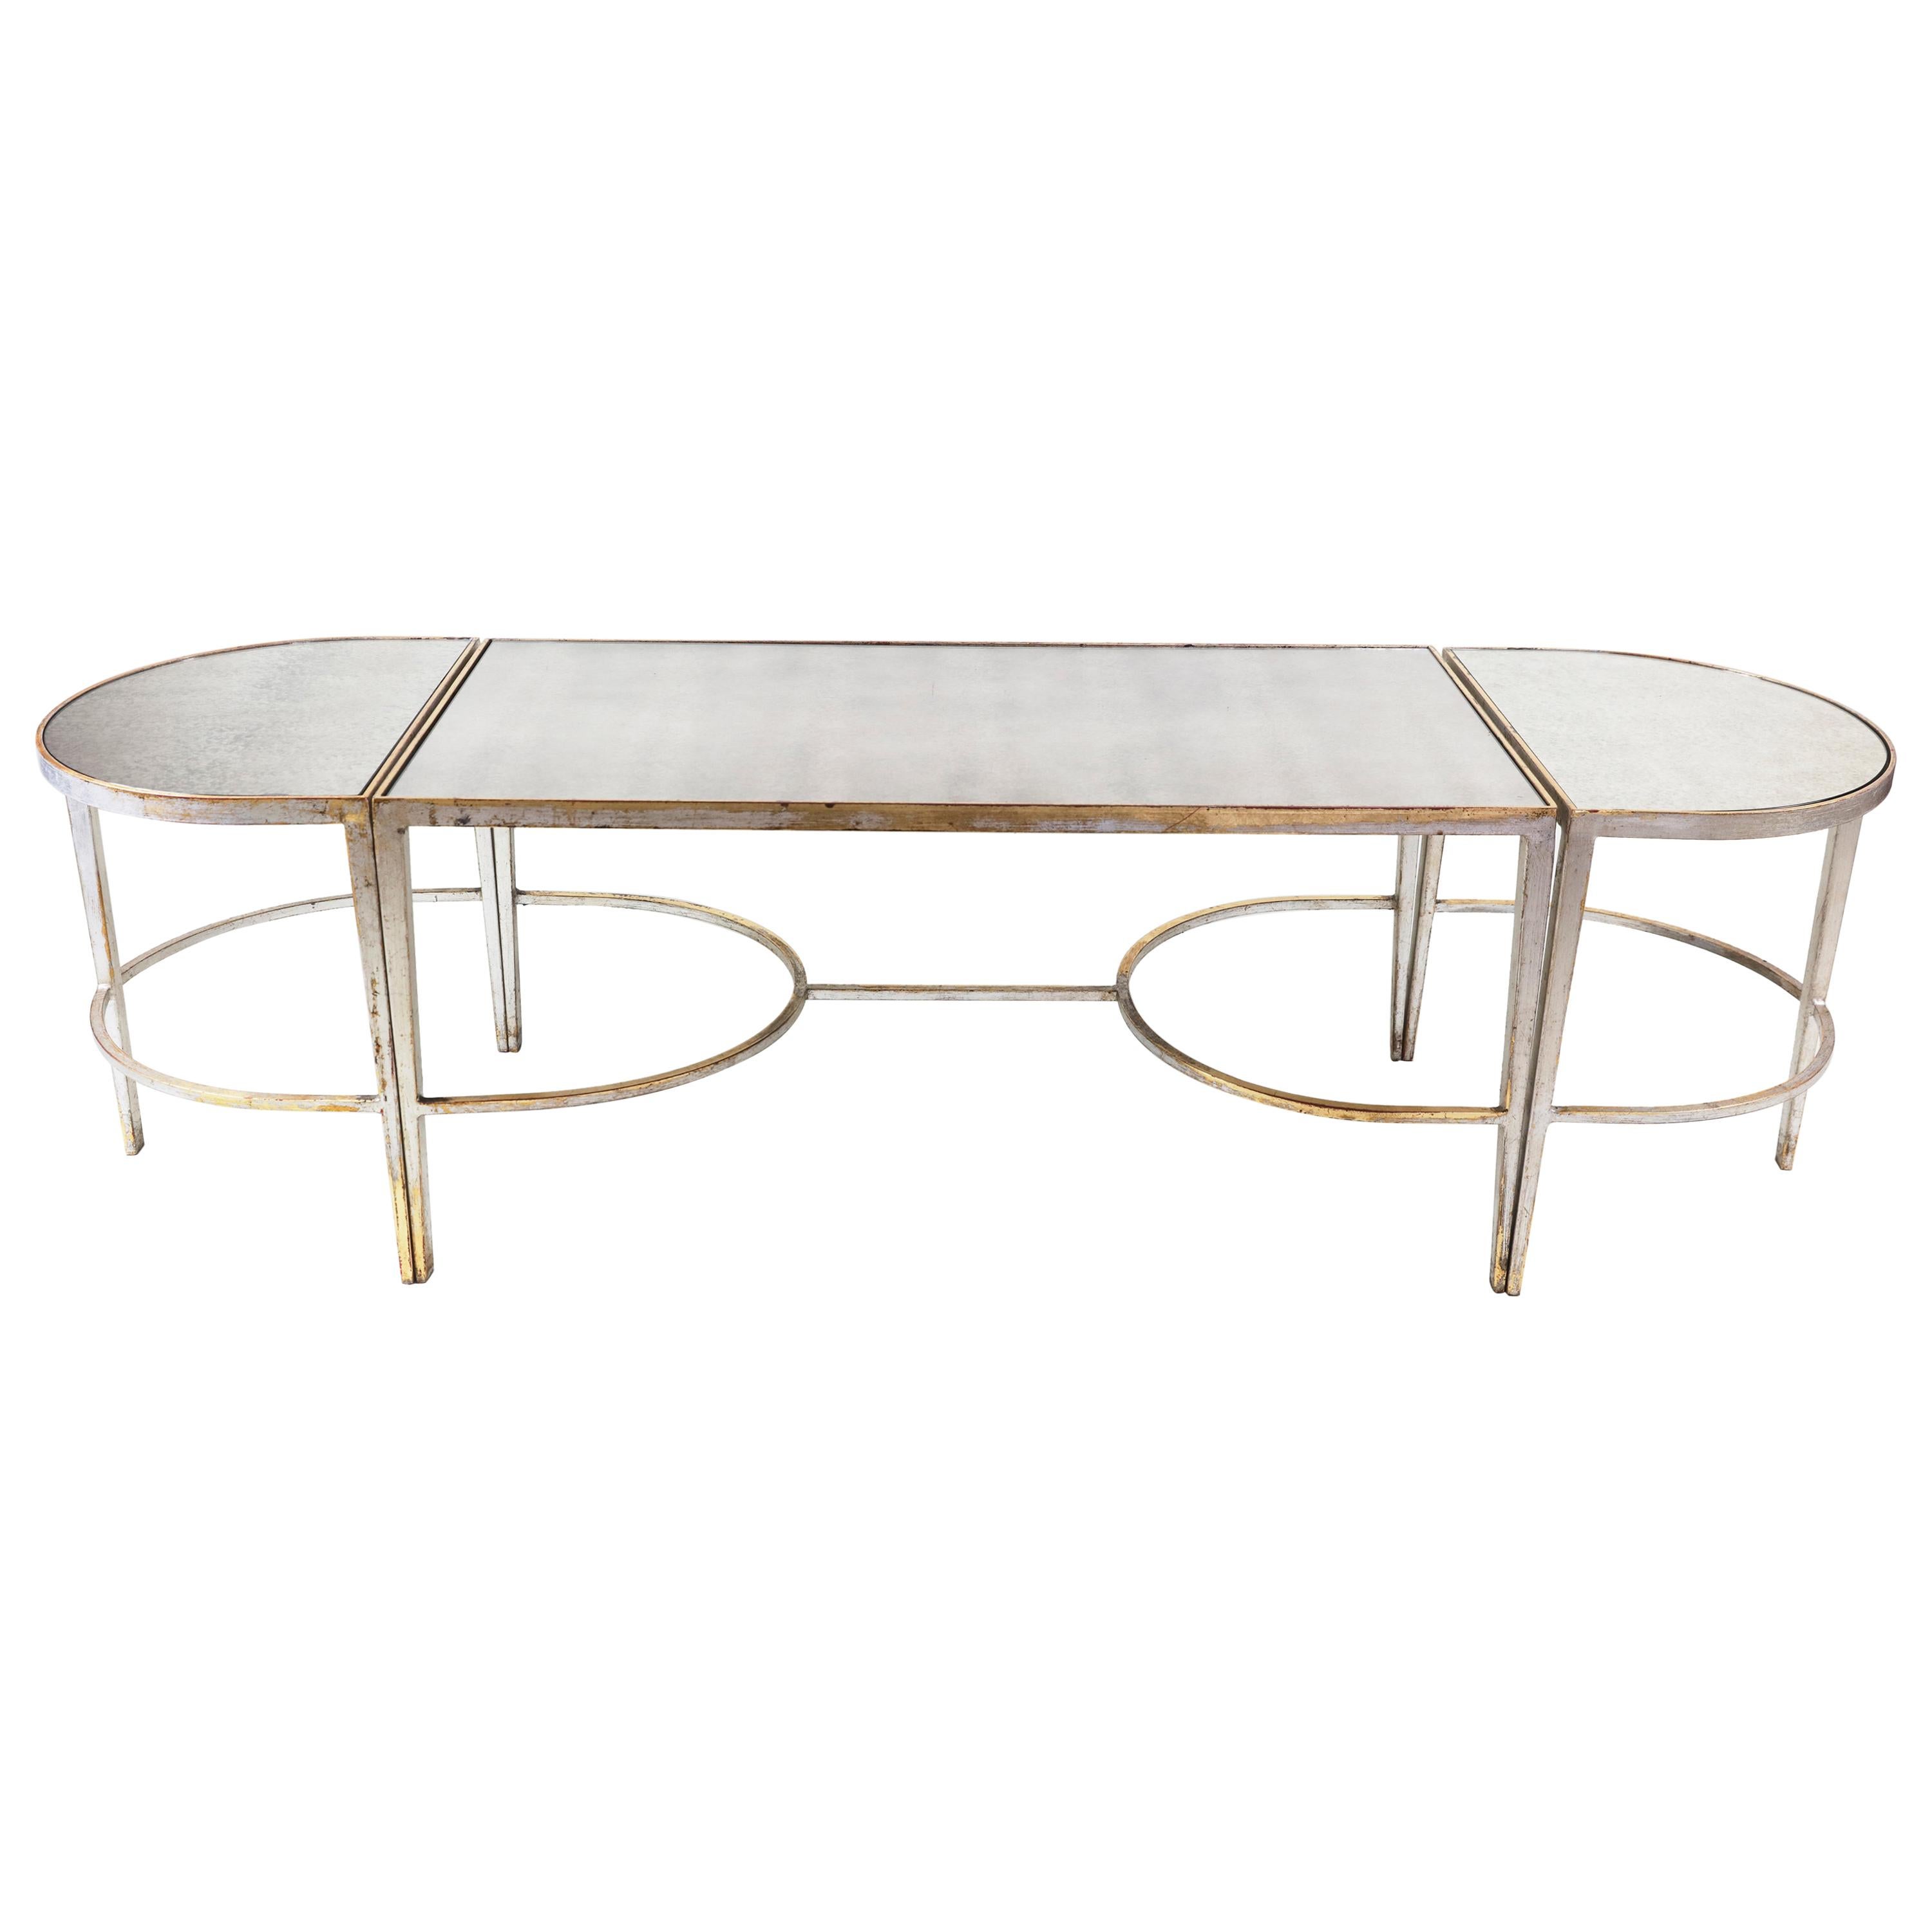 Silver & Gold Mirrored Cocktail Table 3 Pieces